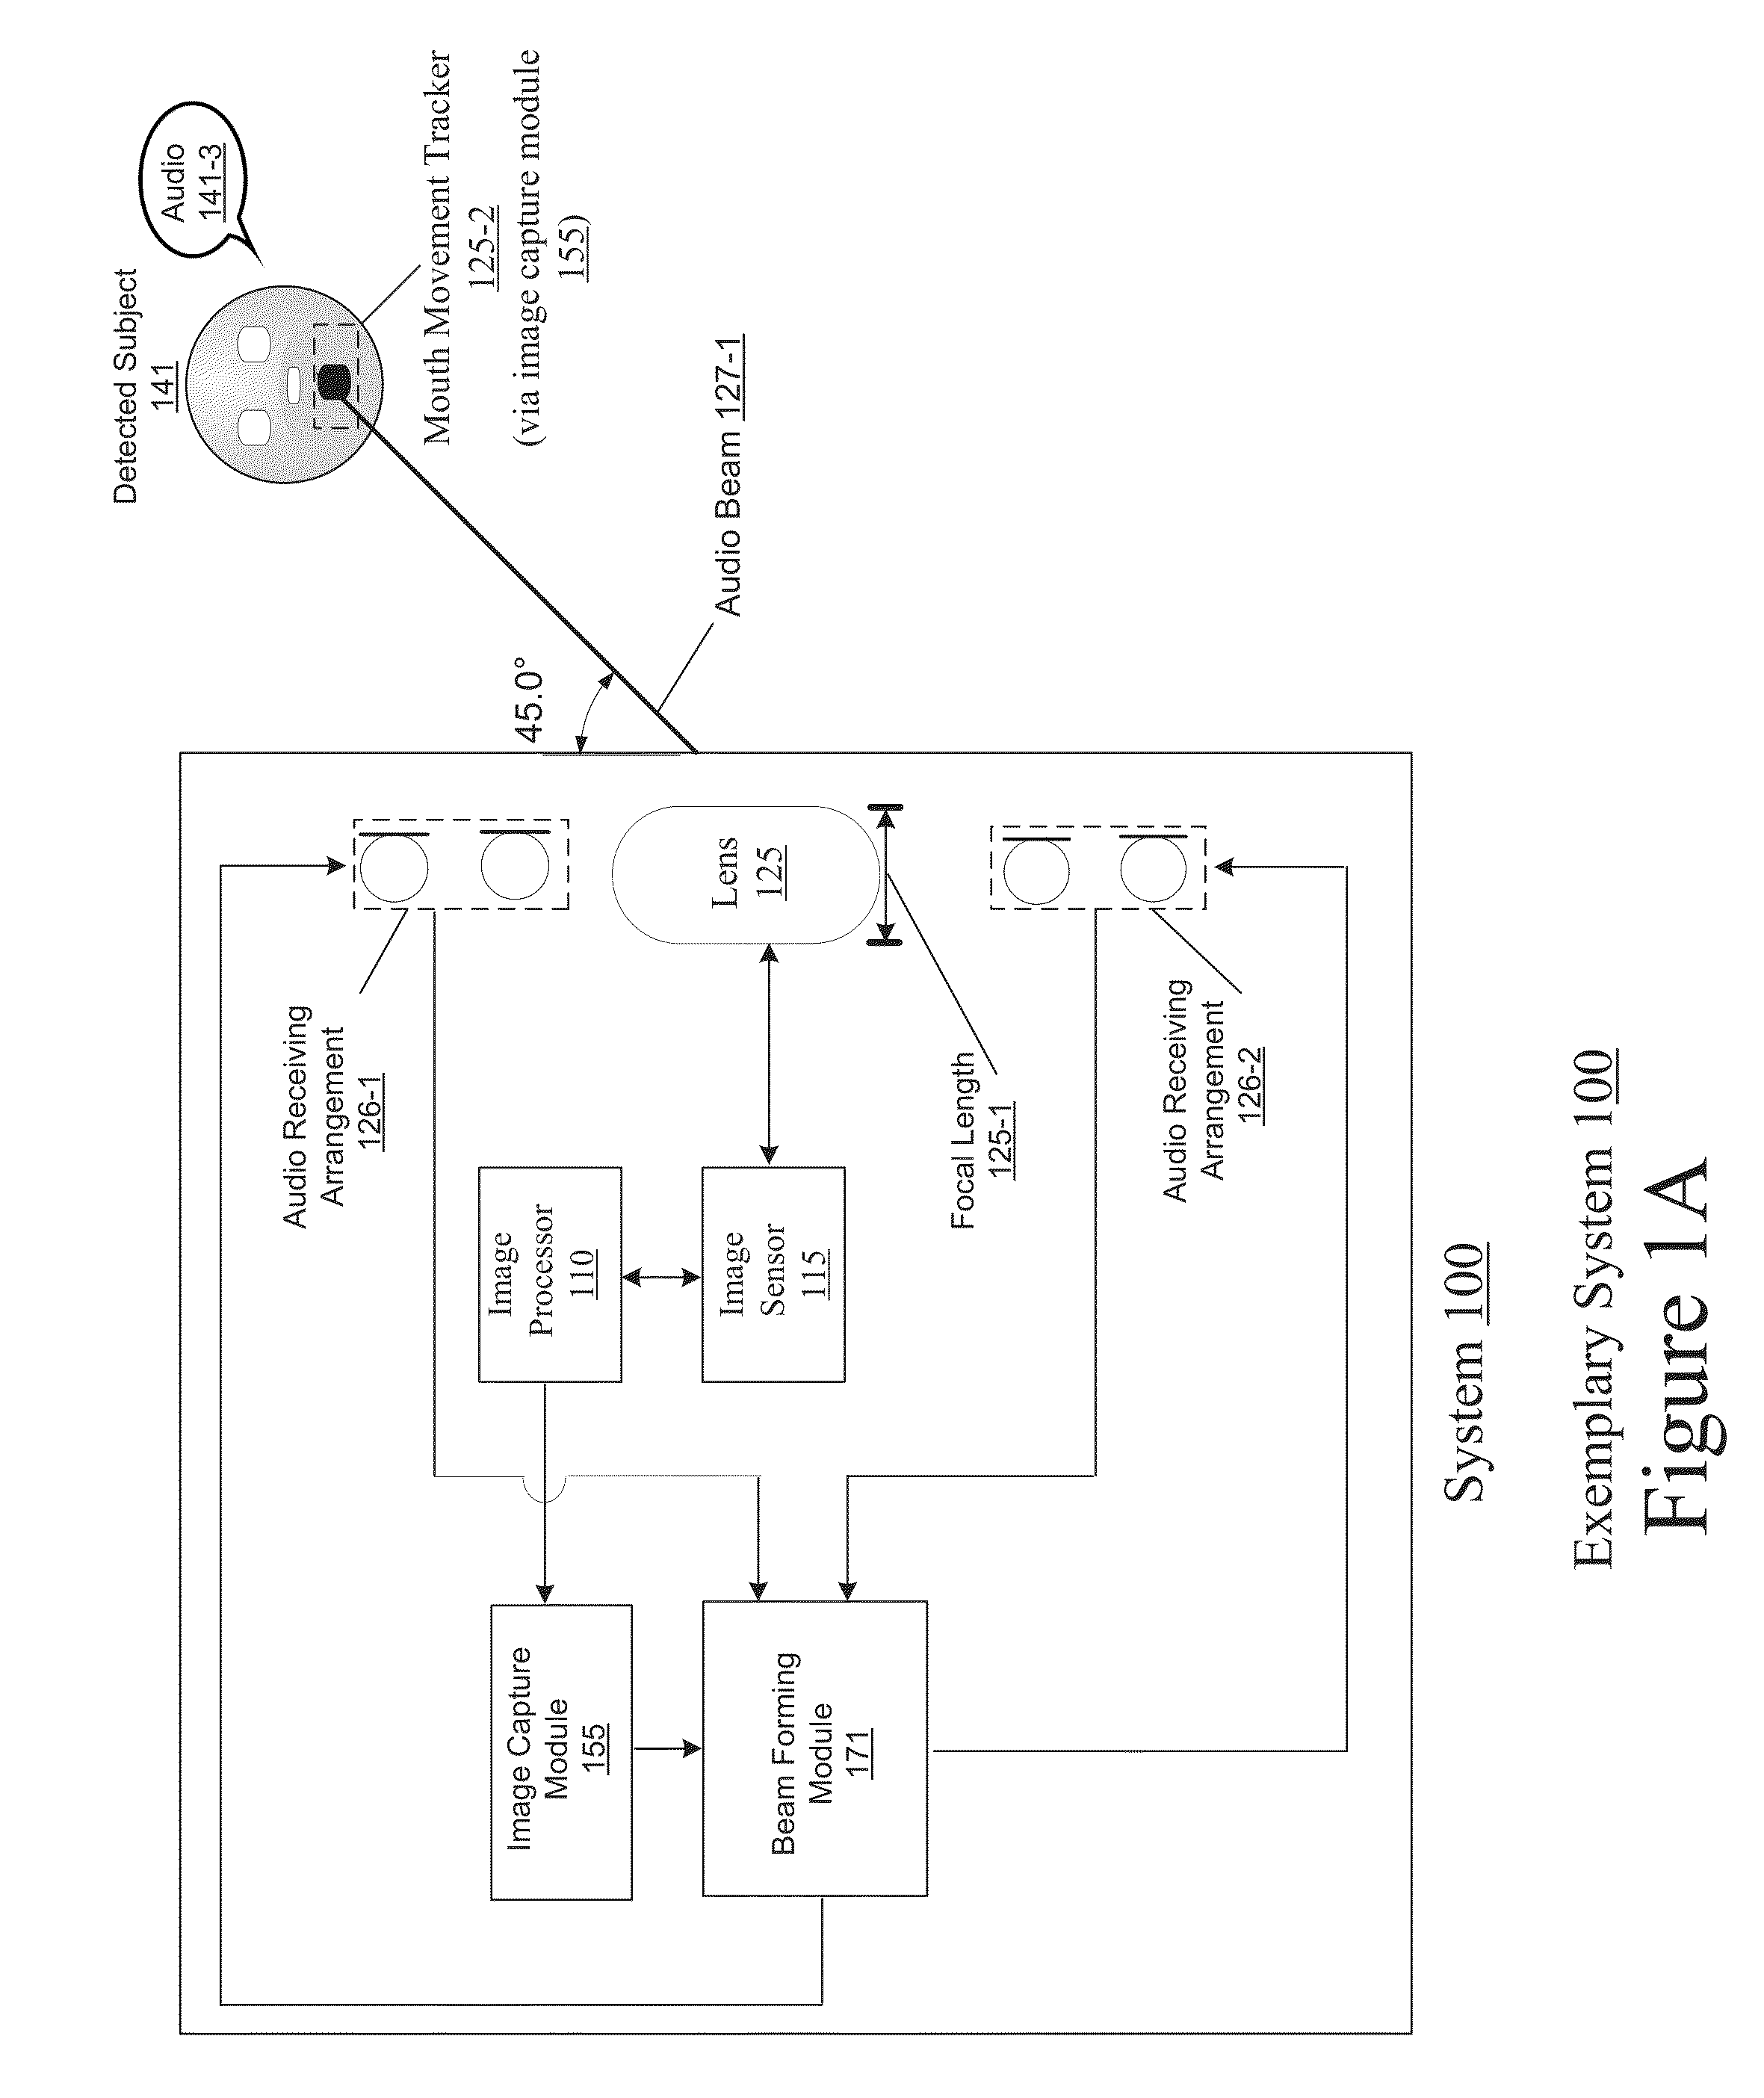 Method and system for voice capture using face detection in noisy environments